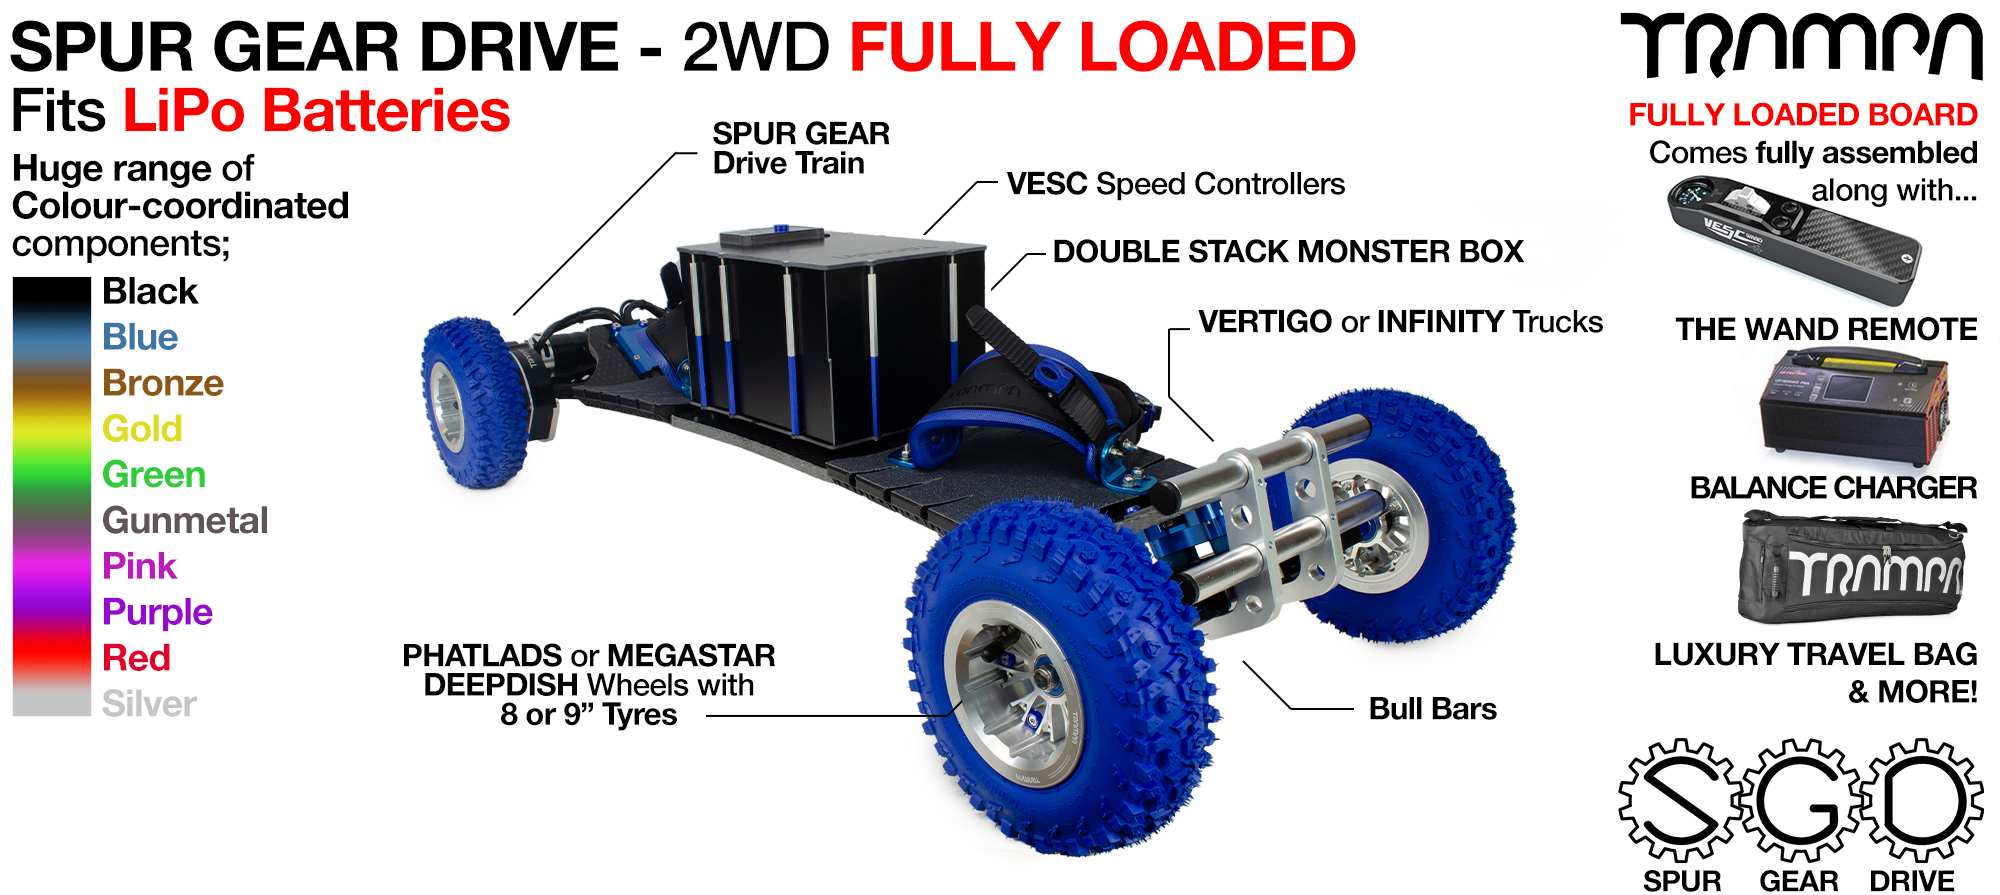 2WD SPUR GEAR DRIVE Electric Mountainboard - FULLY LOADED 12s Li-Po supplied with The WAND, 15A Charger, Luxury Bag, assembled...